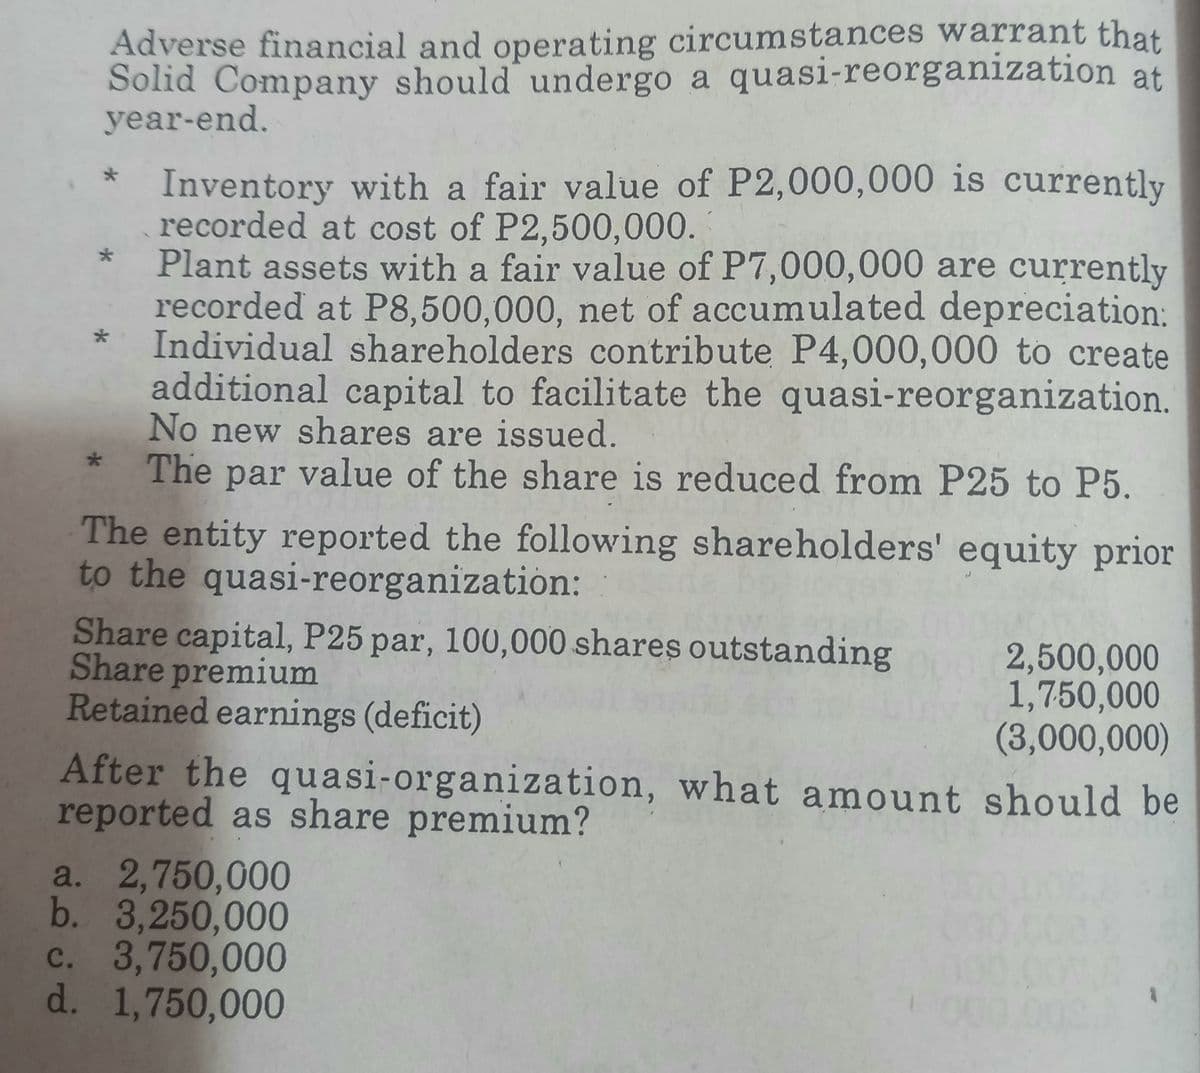 Adverse financial and operating circumstances warrant that
Solid Company should undergo a quasi-reorganization at
year-end.
Inventory with a fair value of P2,000,000 is currently
recorded at cost of P2,500,000.
Plant assets with a fair value of P7,000,000 are currently
recorded at P8,500,000, net of accumulated depreciation:
Individual shareholders contribute P4,000,000 to create
additional capital to facilitate the quasi-reorganization.
No new shares are issued.
*
The par value of the share is reduced from P25 to P5.
The entity reported the following shareholders' equity prior
to the quasi-reorganization:
Share capital, P25 par, 100,000 shares outstanding
Share premium
2,500,000
1,750,000
Retained earnings (deficit)
(3,000,000)
After the quasi-organization, what amount should be
reported as share premium?
a. 2,750,000
b. 3,250,000
c. 3,750,000
d. 1,750,000